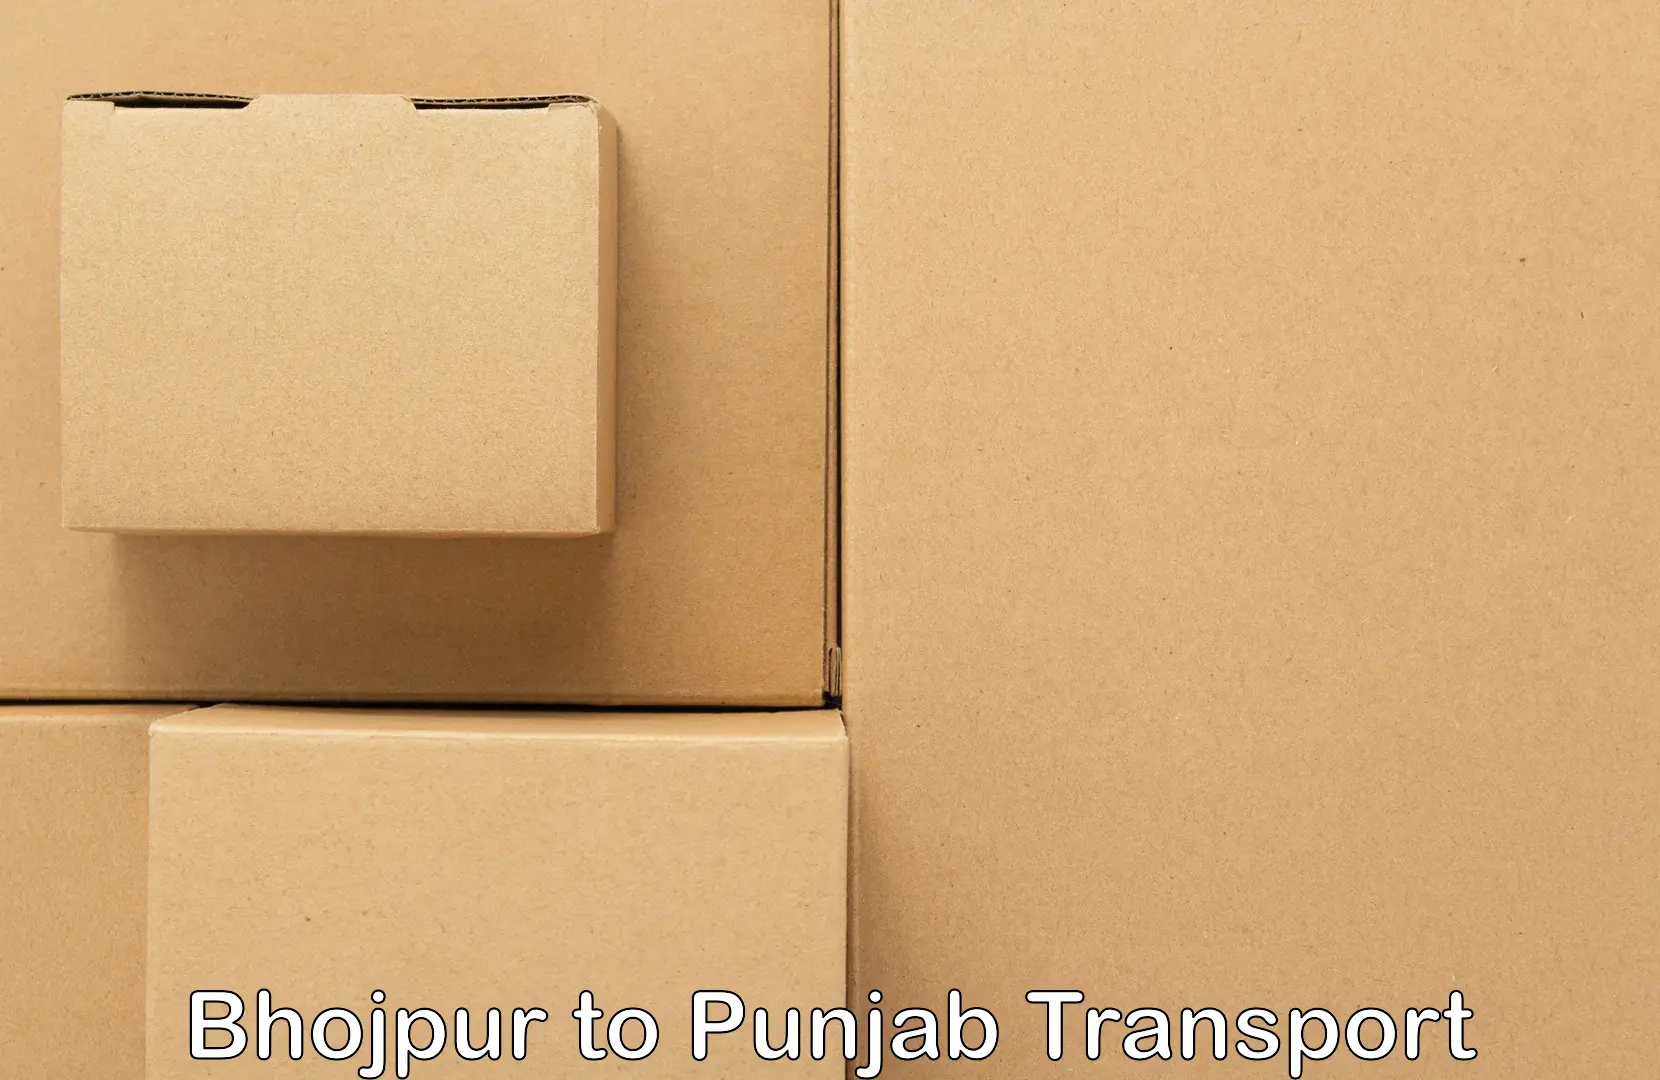 Daily parcel service transport Bhojpur to Dera Bassi